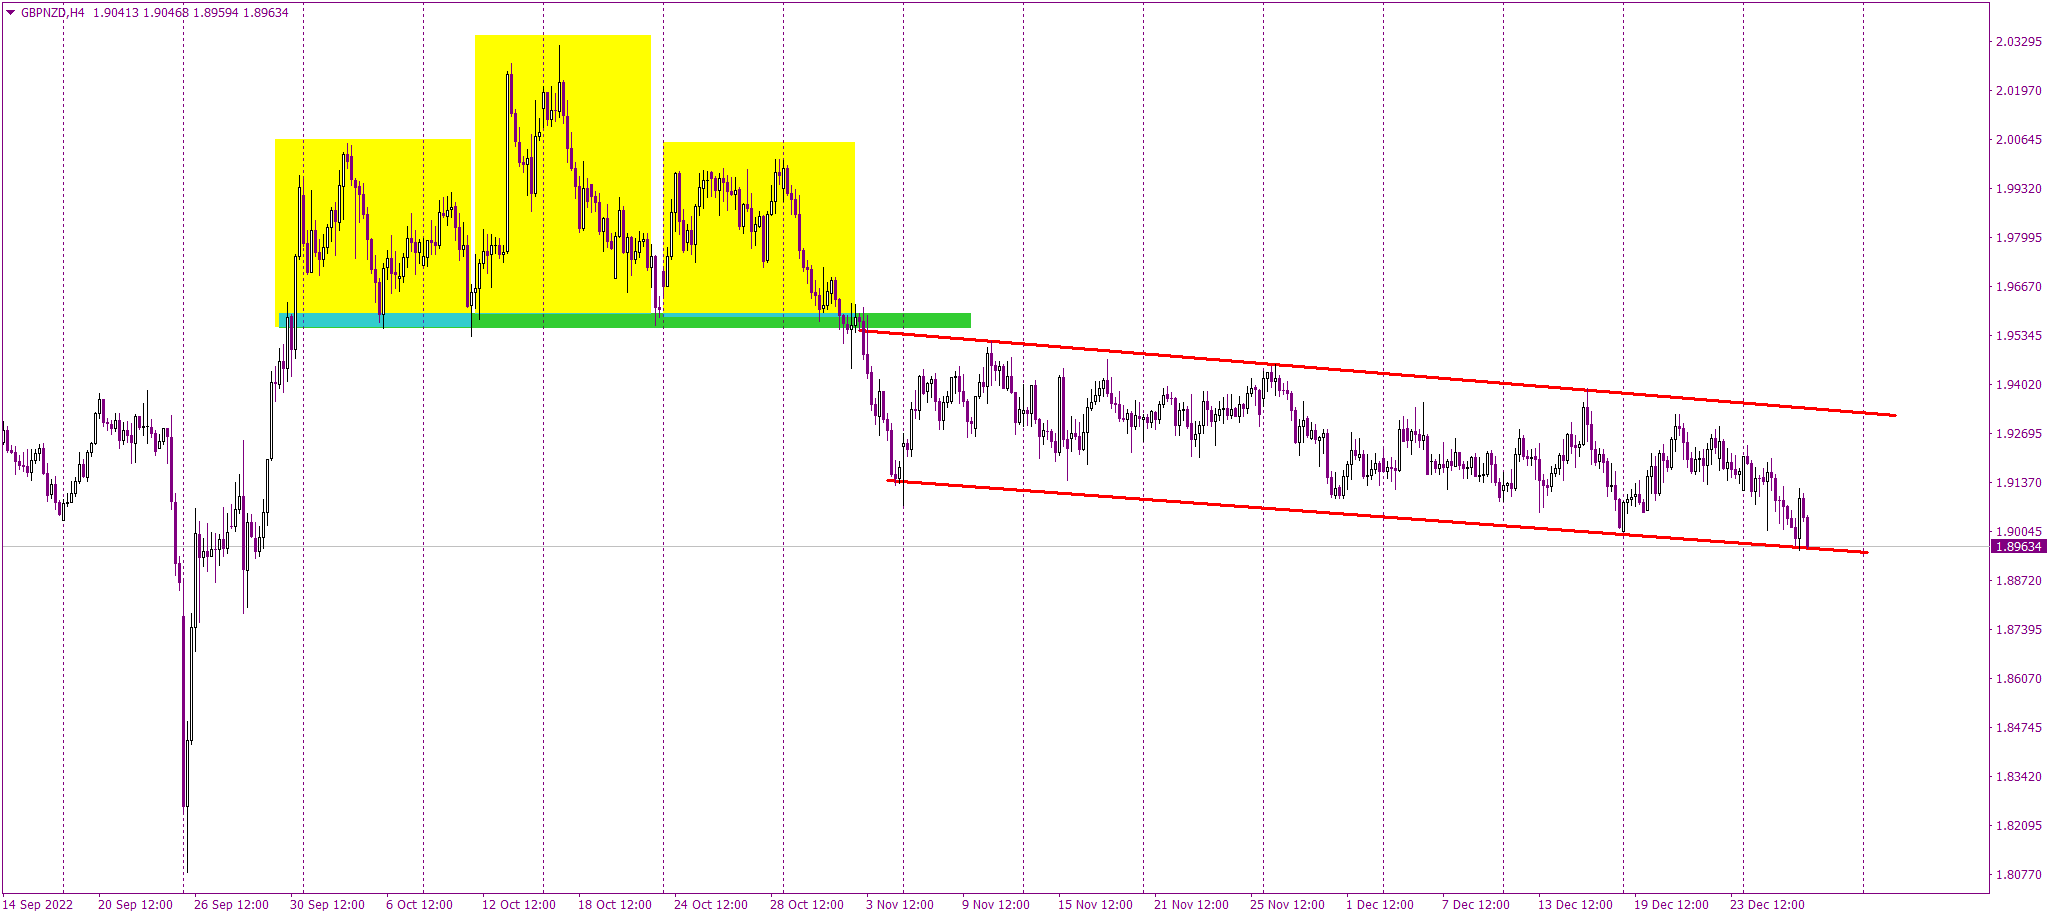 GBPNZD tests the lower line of the channel down pattern